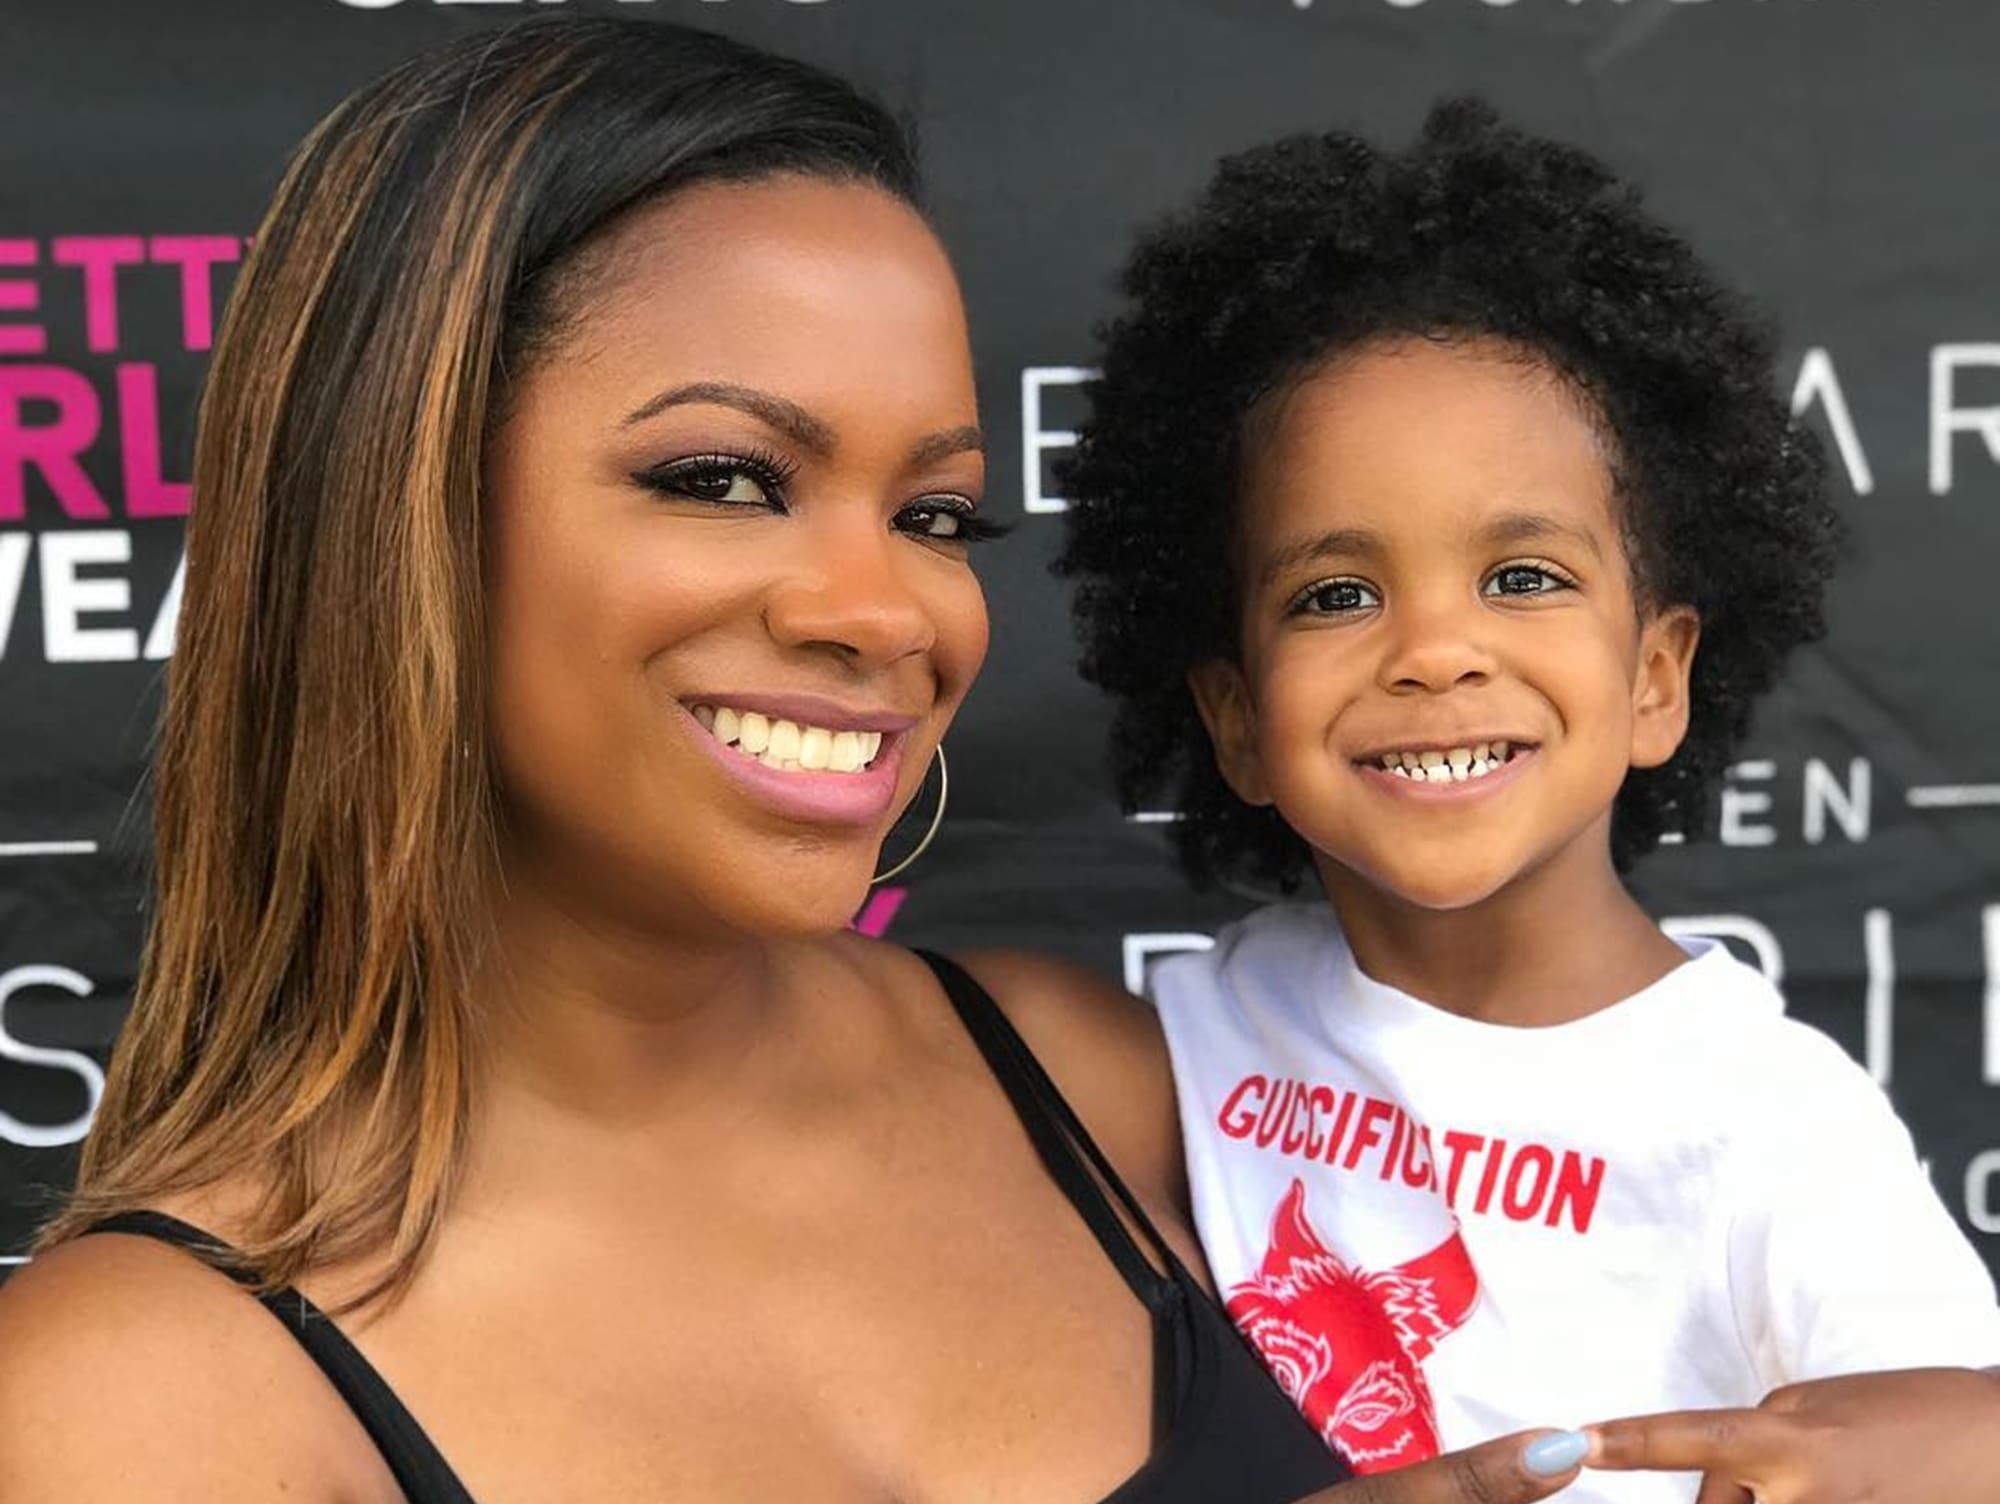 Kandi Burruss Is Proud Of Her And Todd Tucker's Son, Ace Wells Burruss - Check Out The Video With His Game